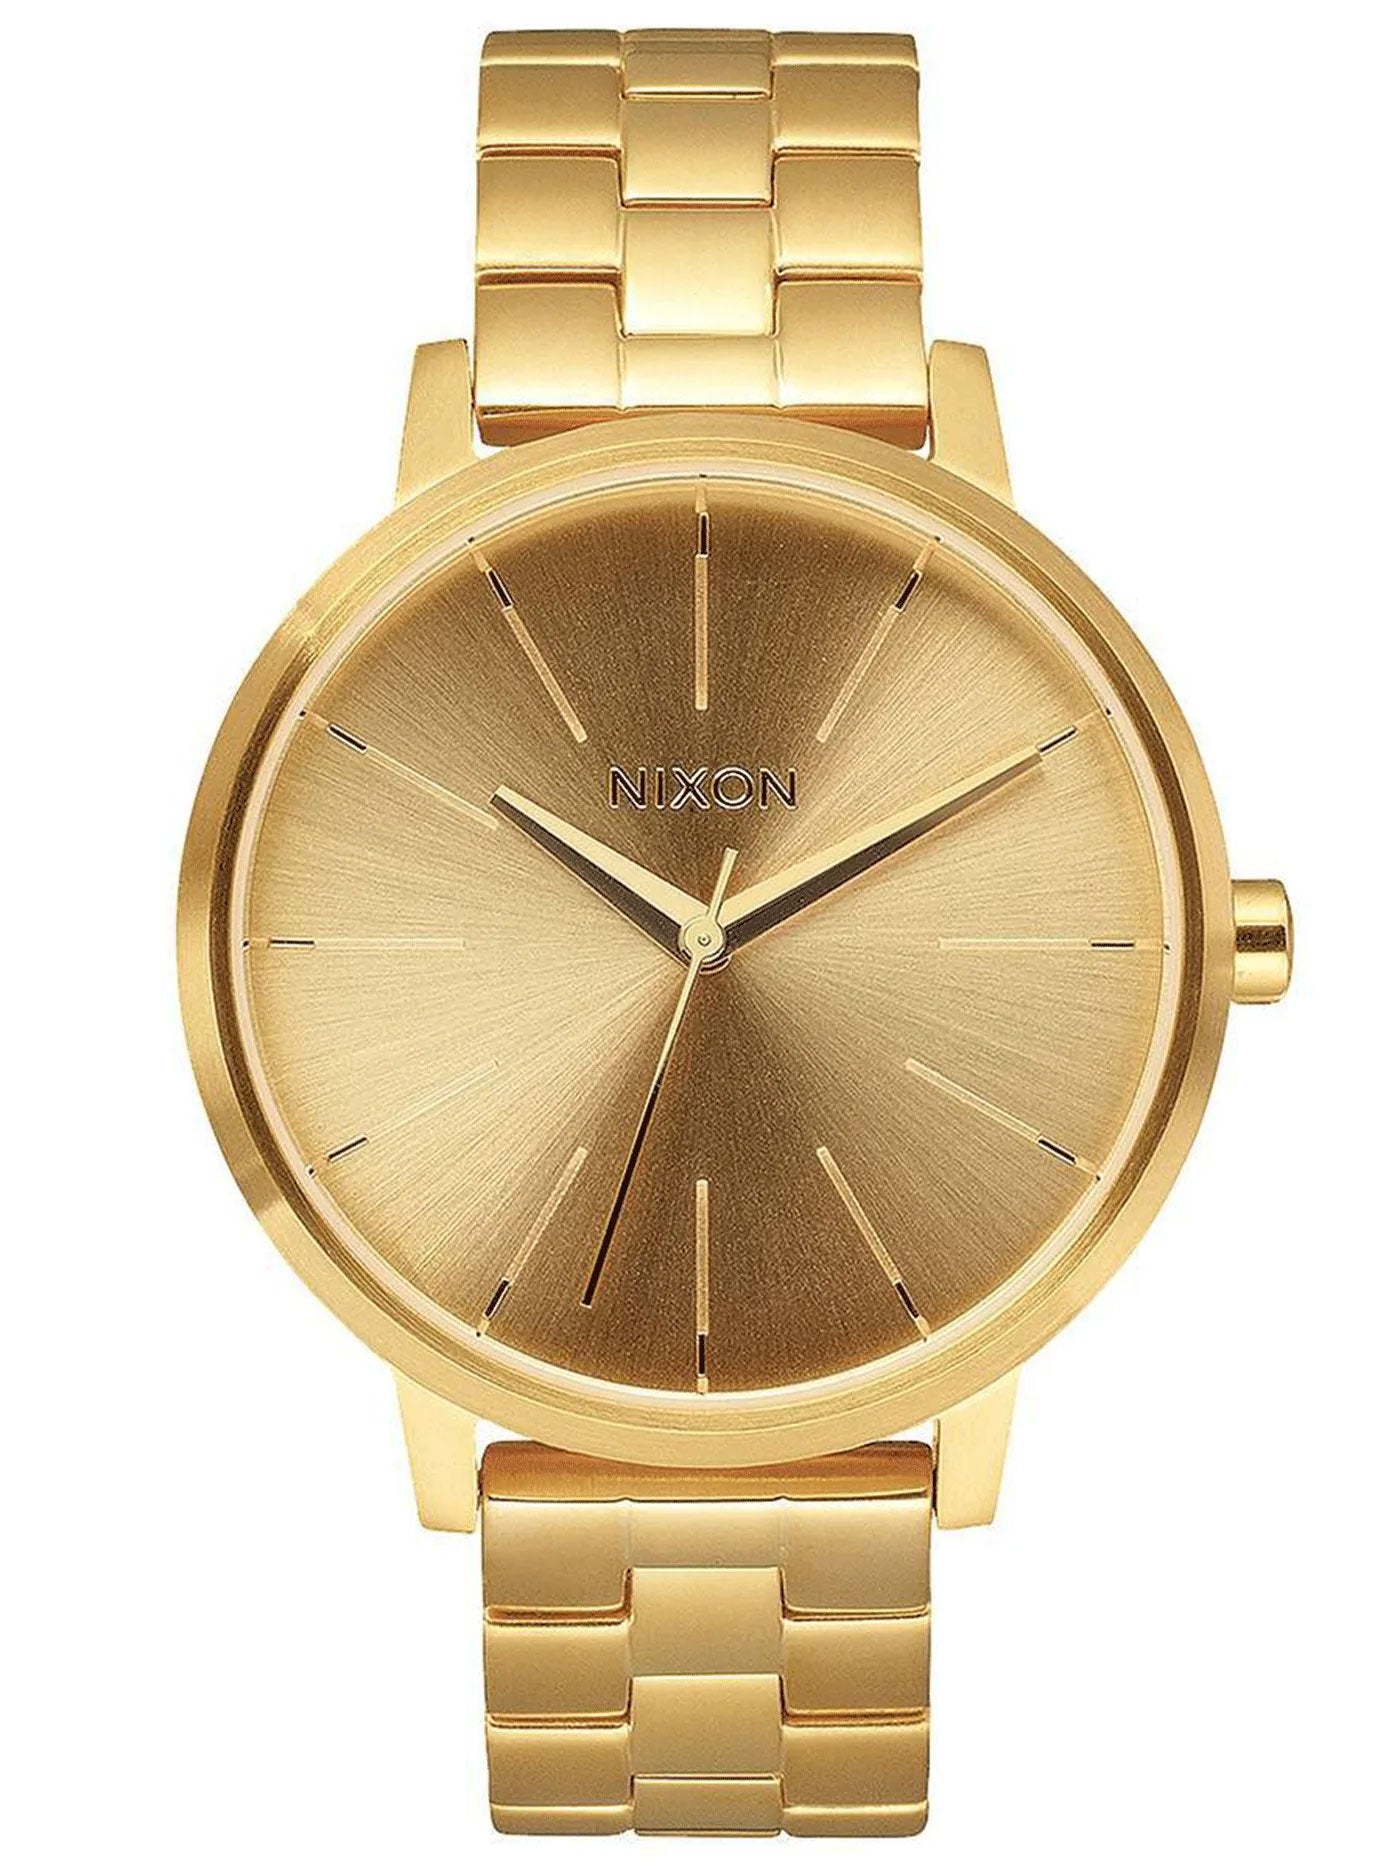 The Kensington All Gold Watch